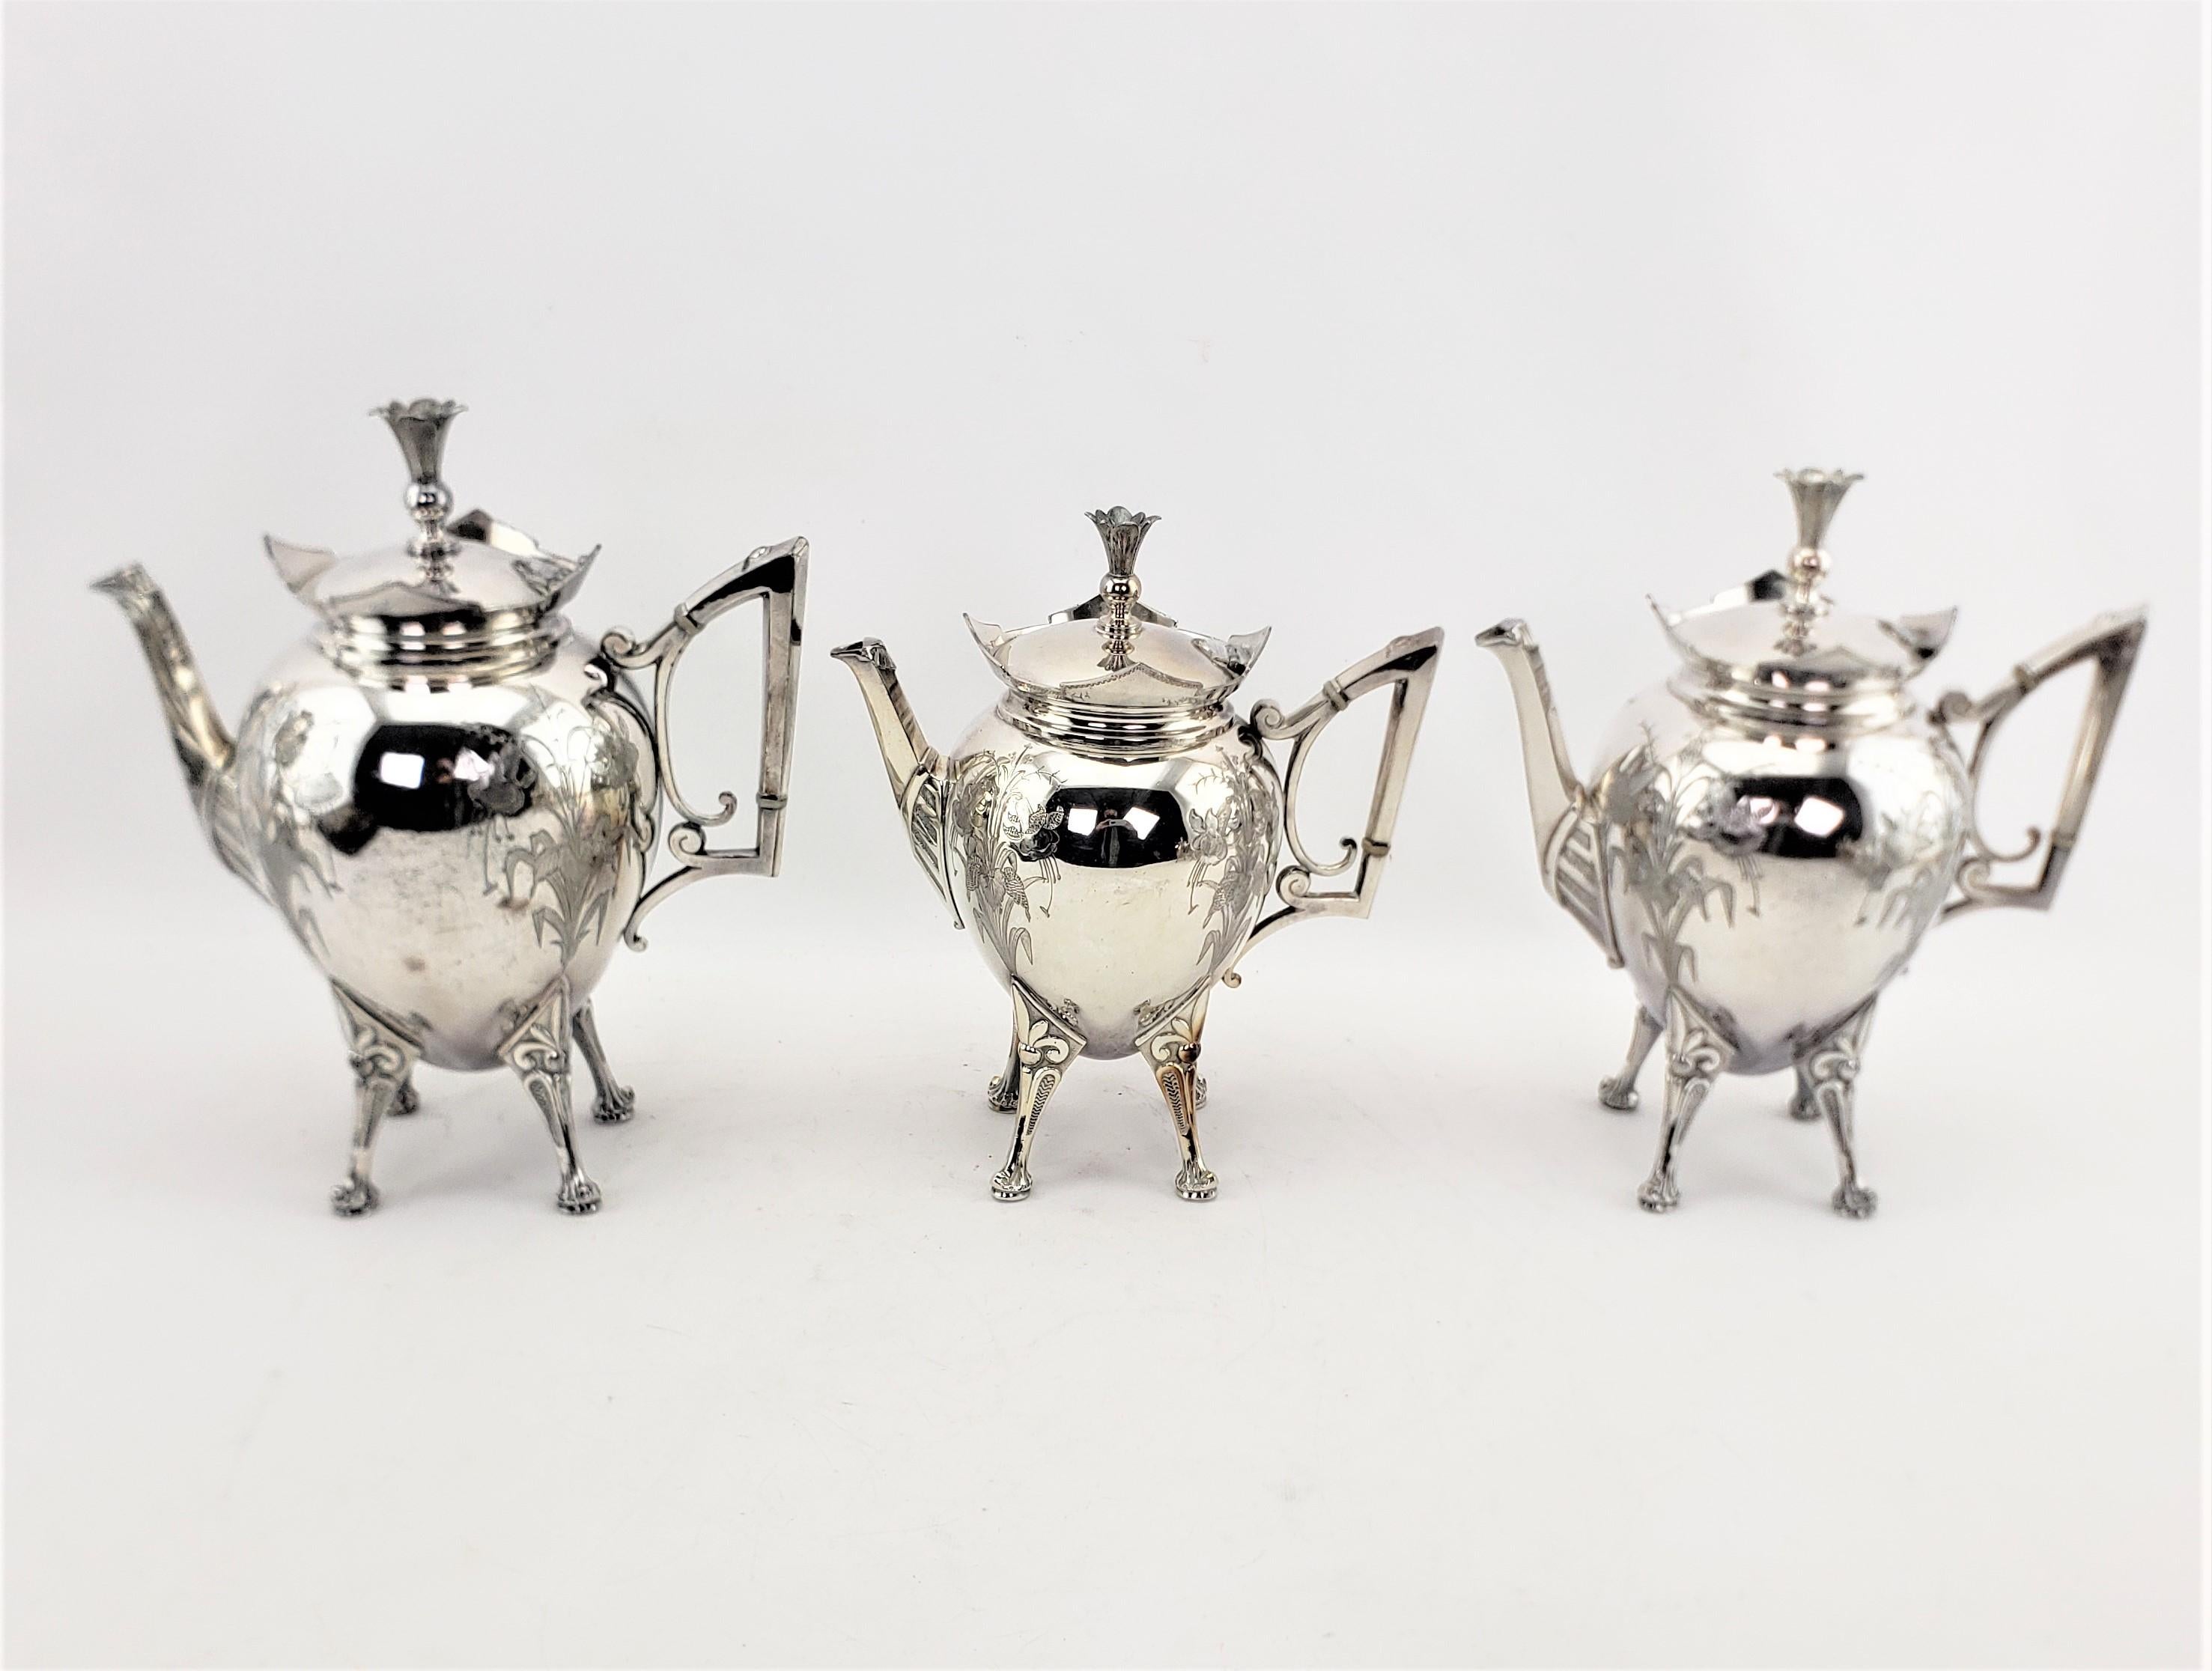 Antique Aesthetic Movement 7 Piece Silver Plated Tea Set with Floral Decoration For Sale 1